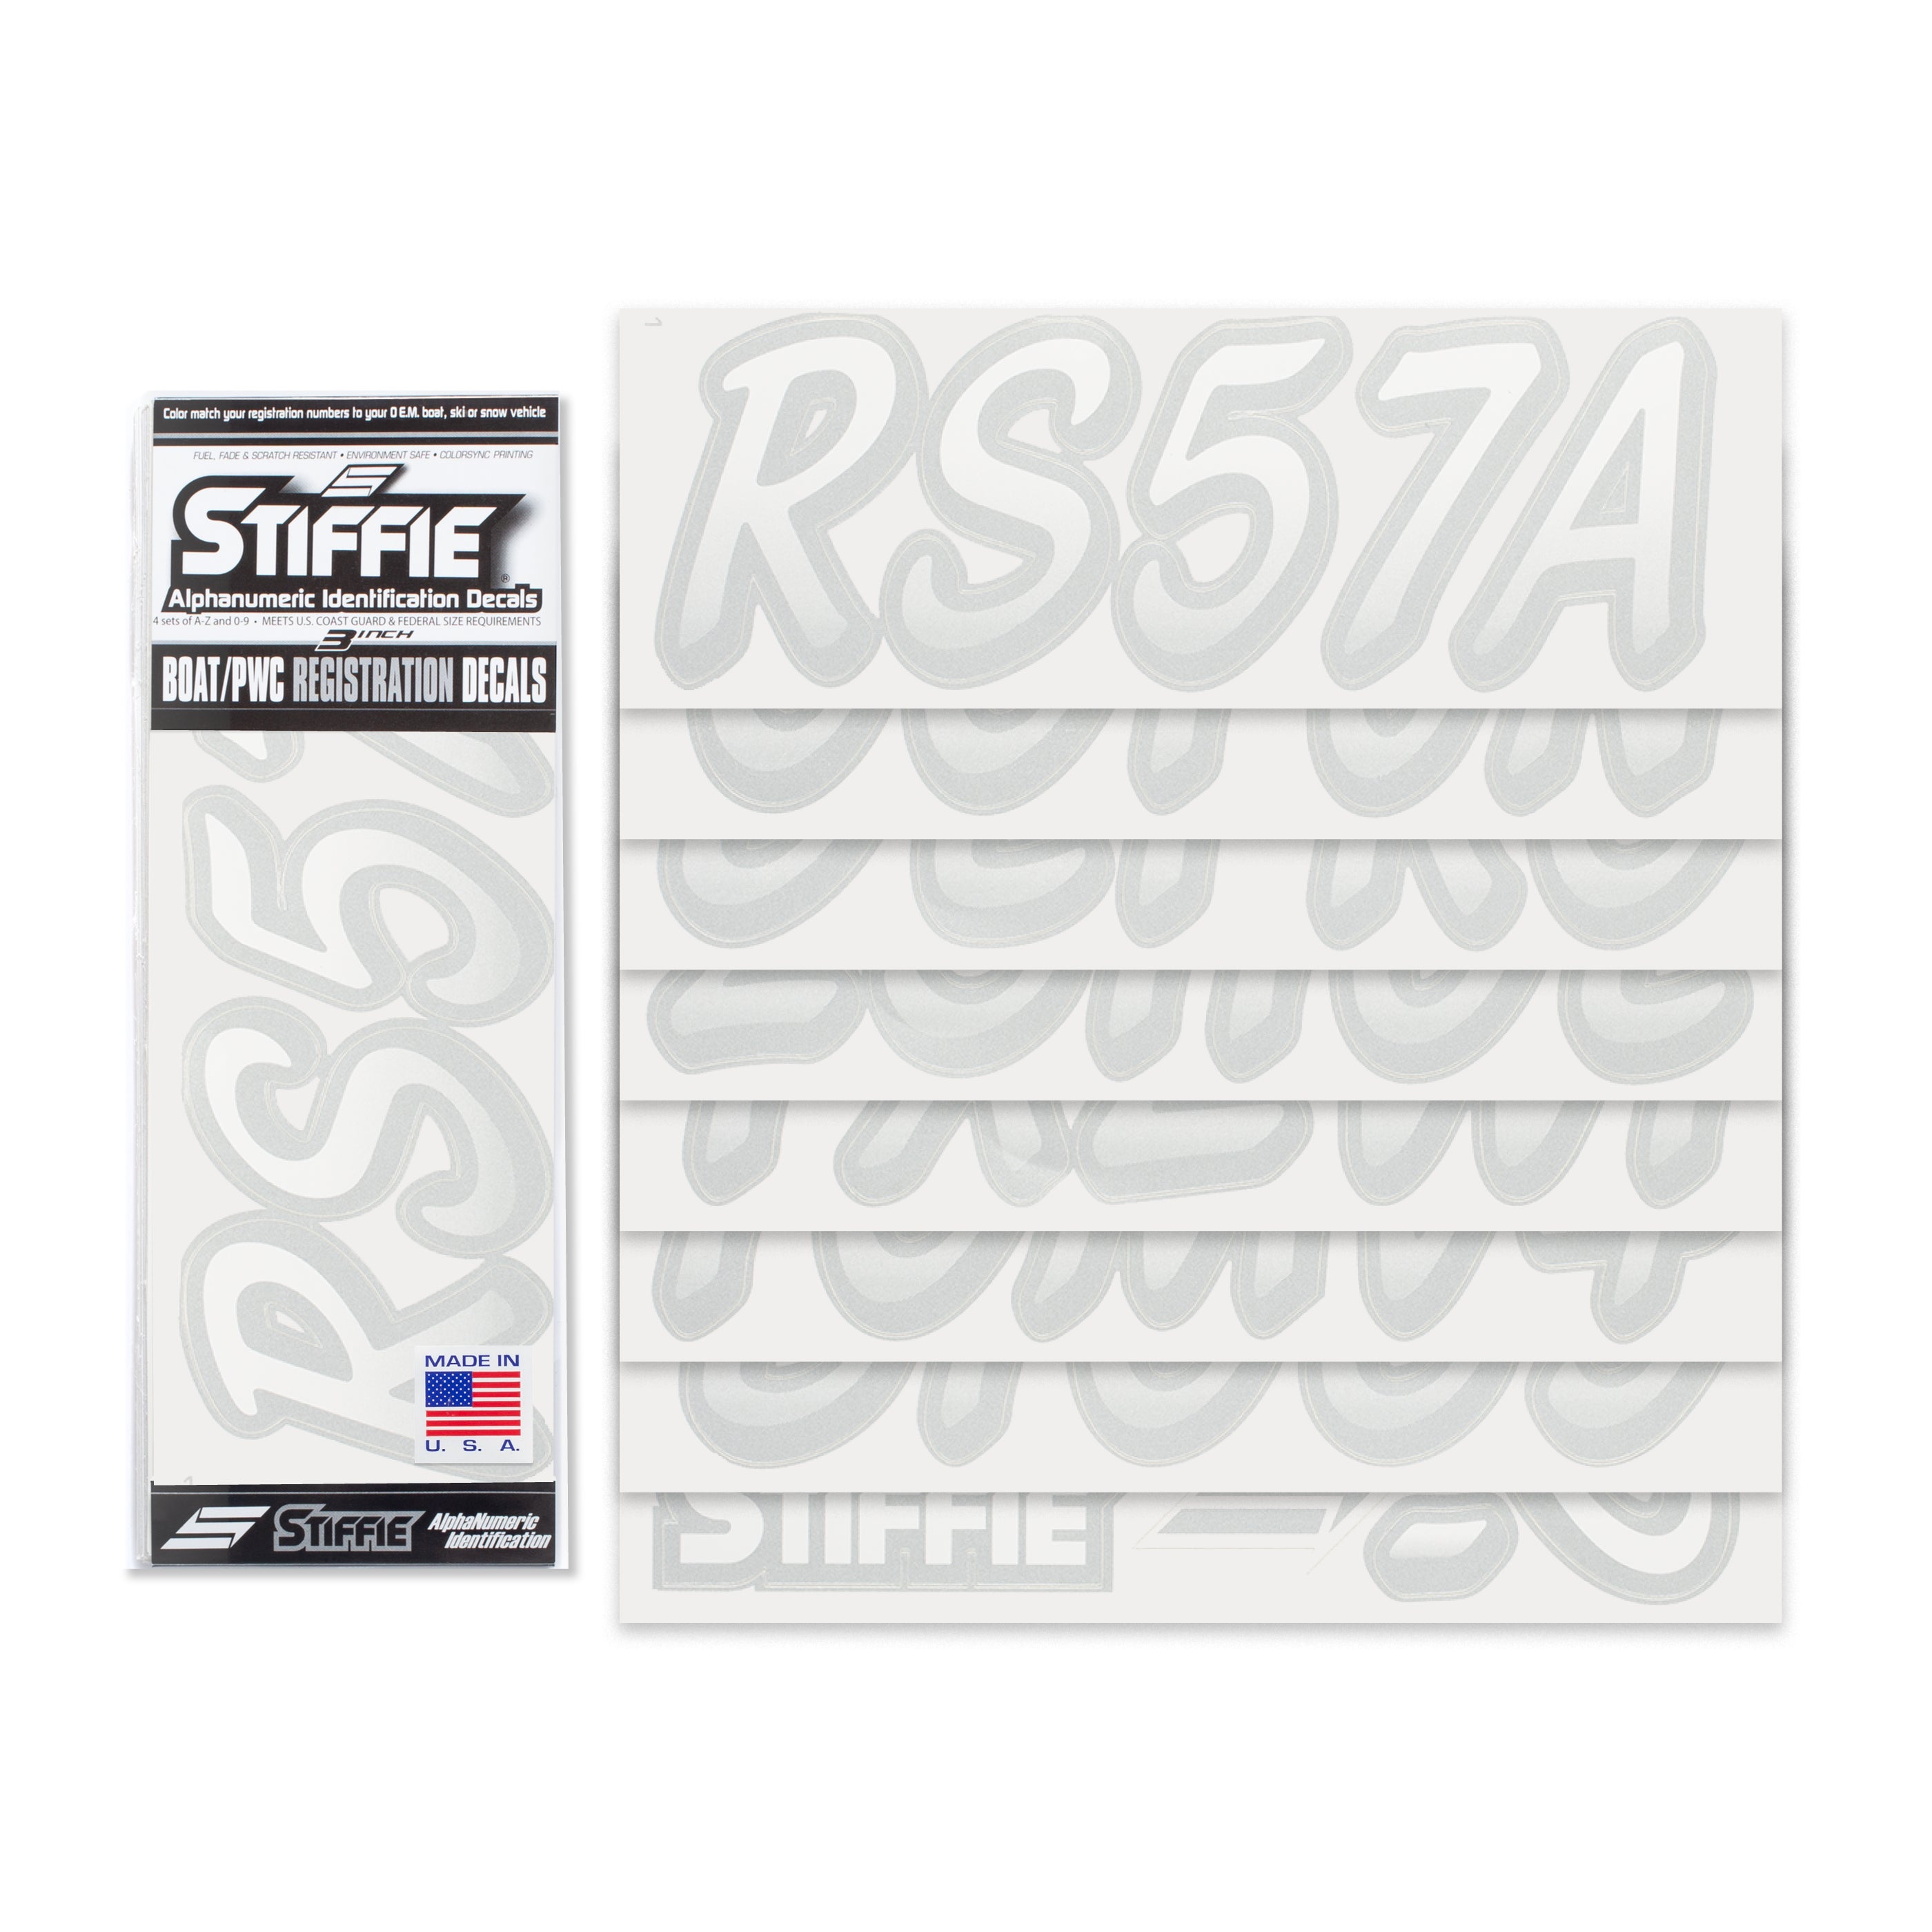 STIFFIE Whipline White/Silver 3" Alpha-Numeric Registration Identification Numbers Stickers Decals for Boats & Personal Watercraft